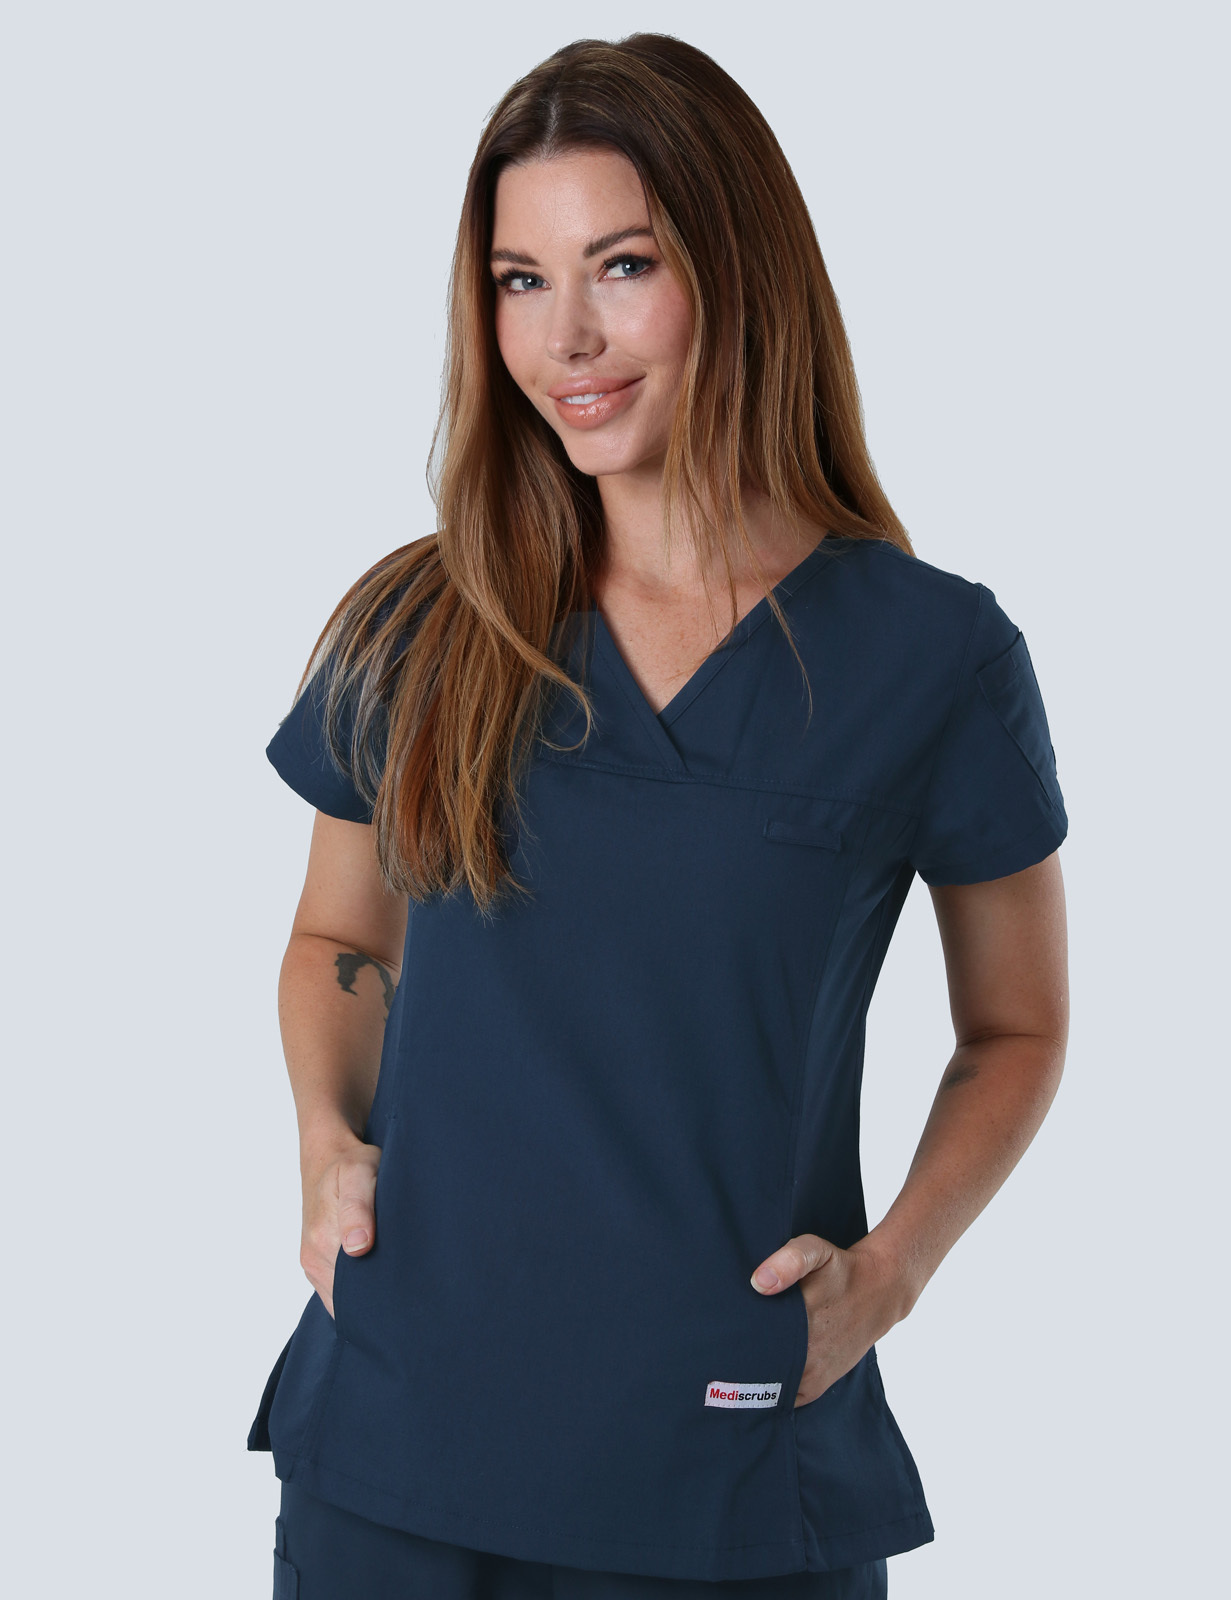 Dandenong Monash Health - ICU (Women's Fit Solid Scrub Top and Cargo Pants in Navy incl Logos)